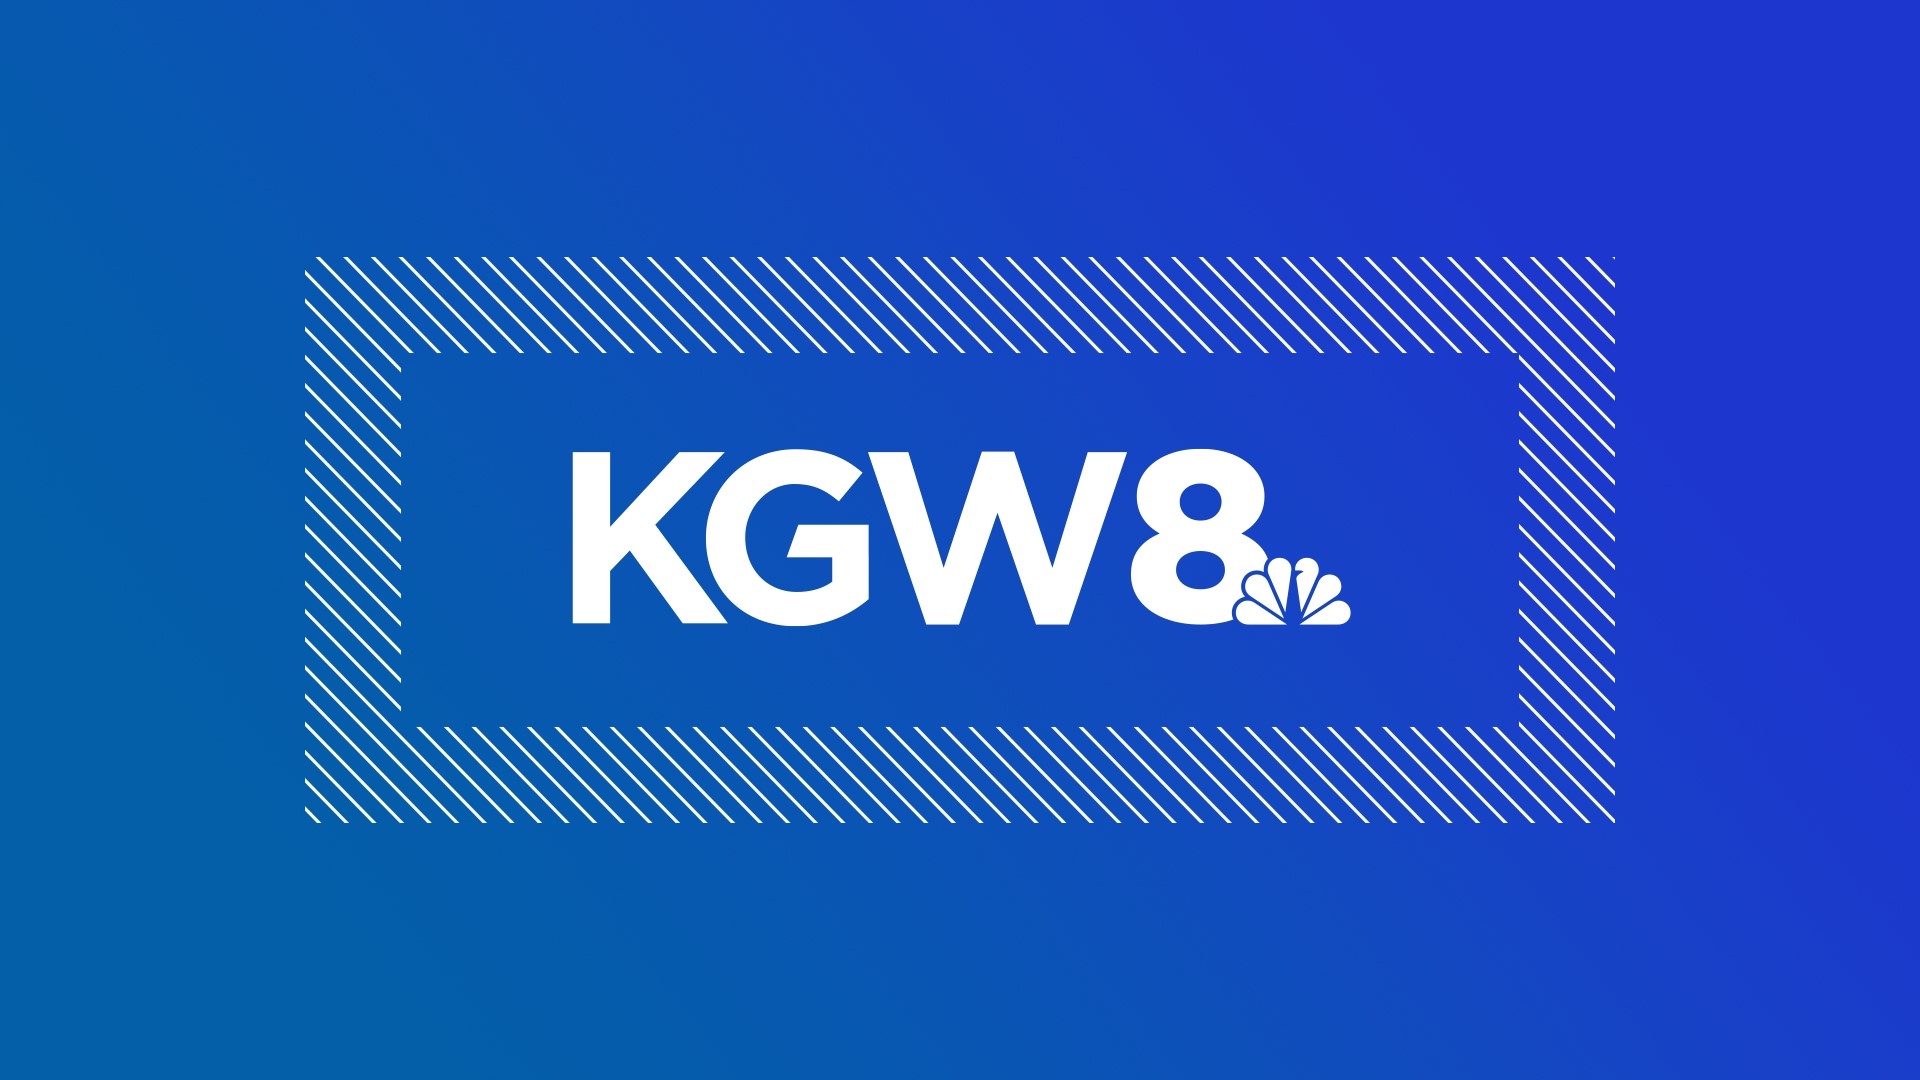 We deeply regret and apologize for the distress caused by the inadvertent airing of offensive content during a Thursday evening broadcast on KGW.